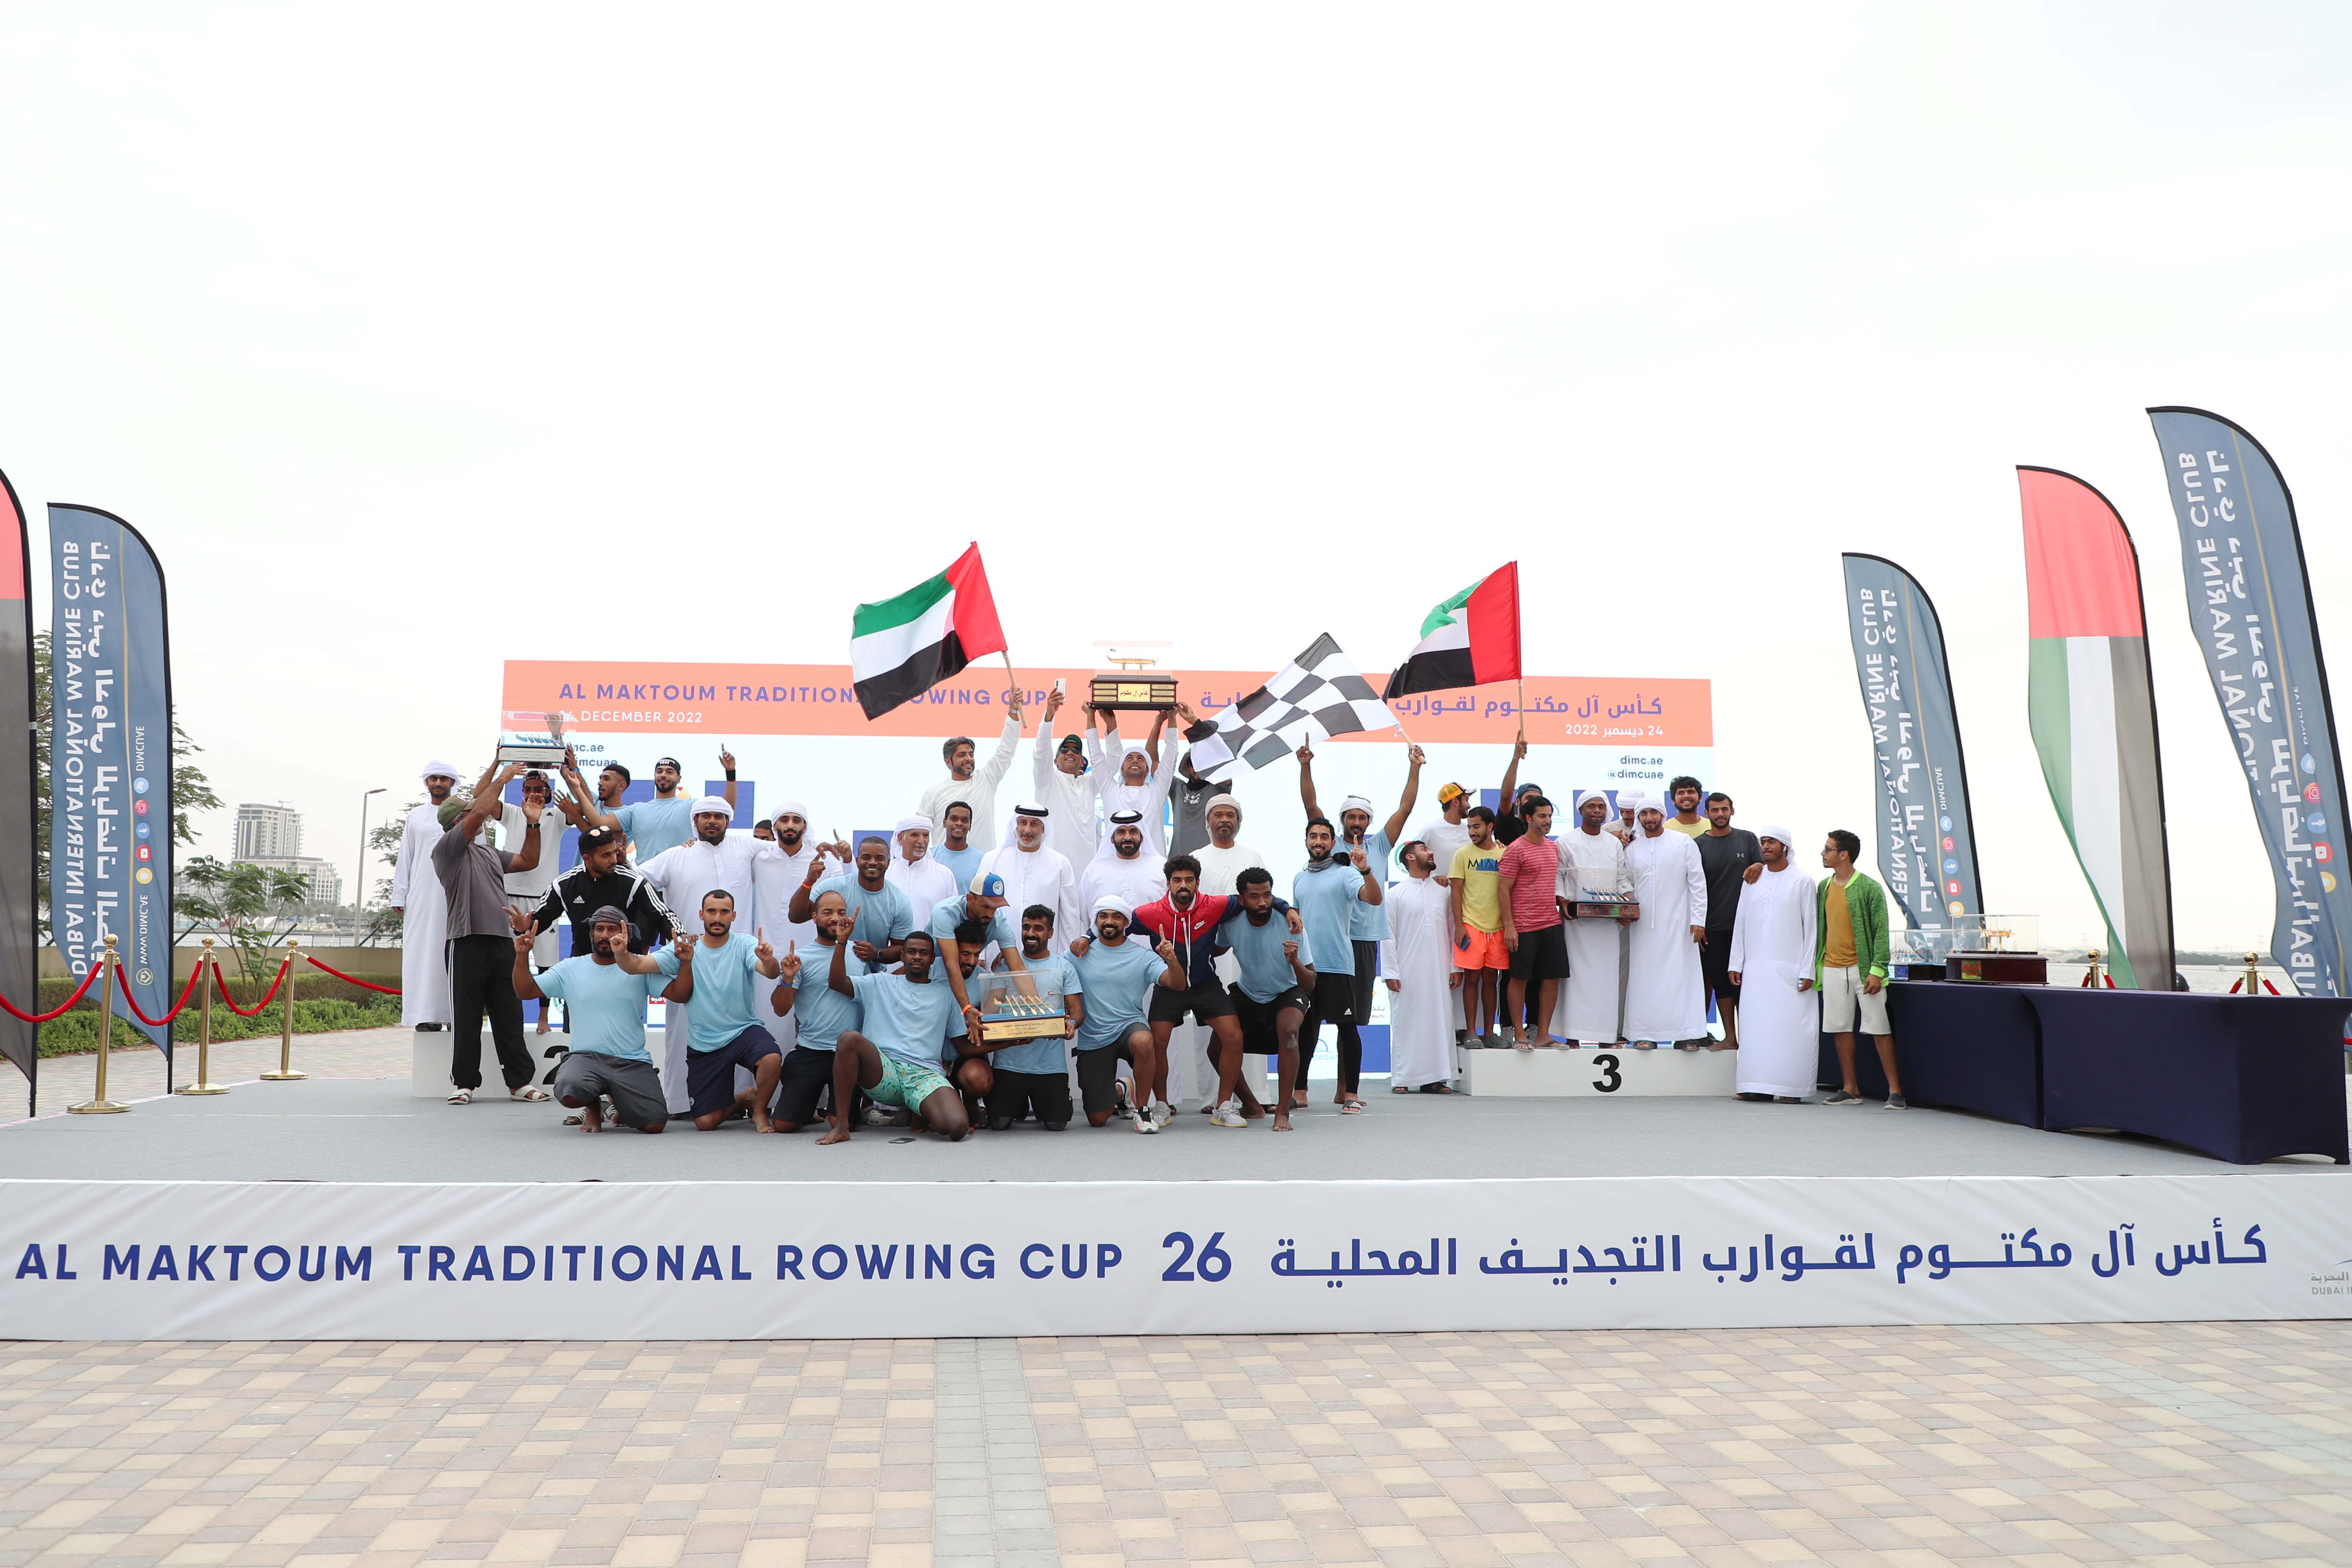 Al Asifa 36 retains the title for the Al Maktoum Cup Traditional Rowing Race